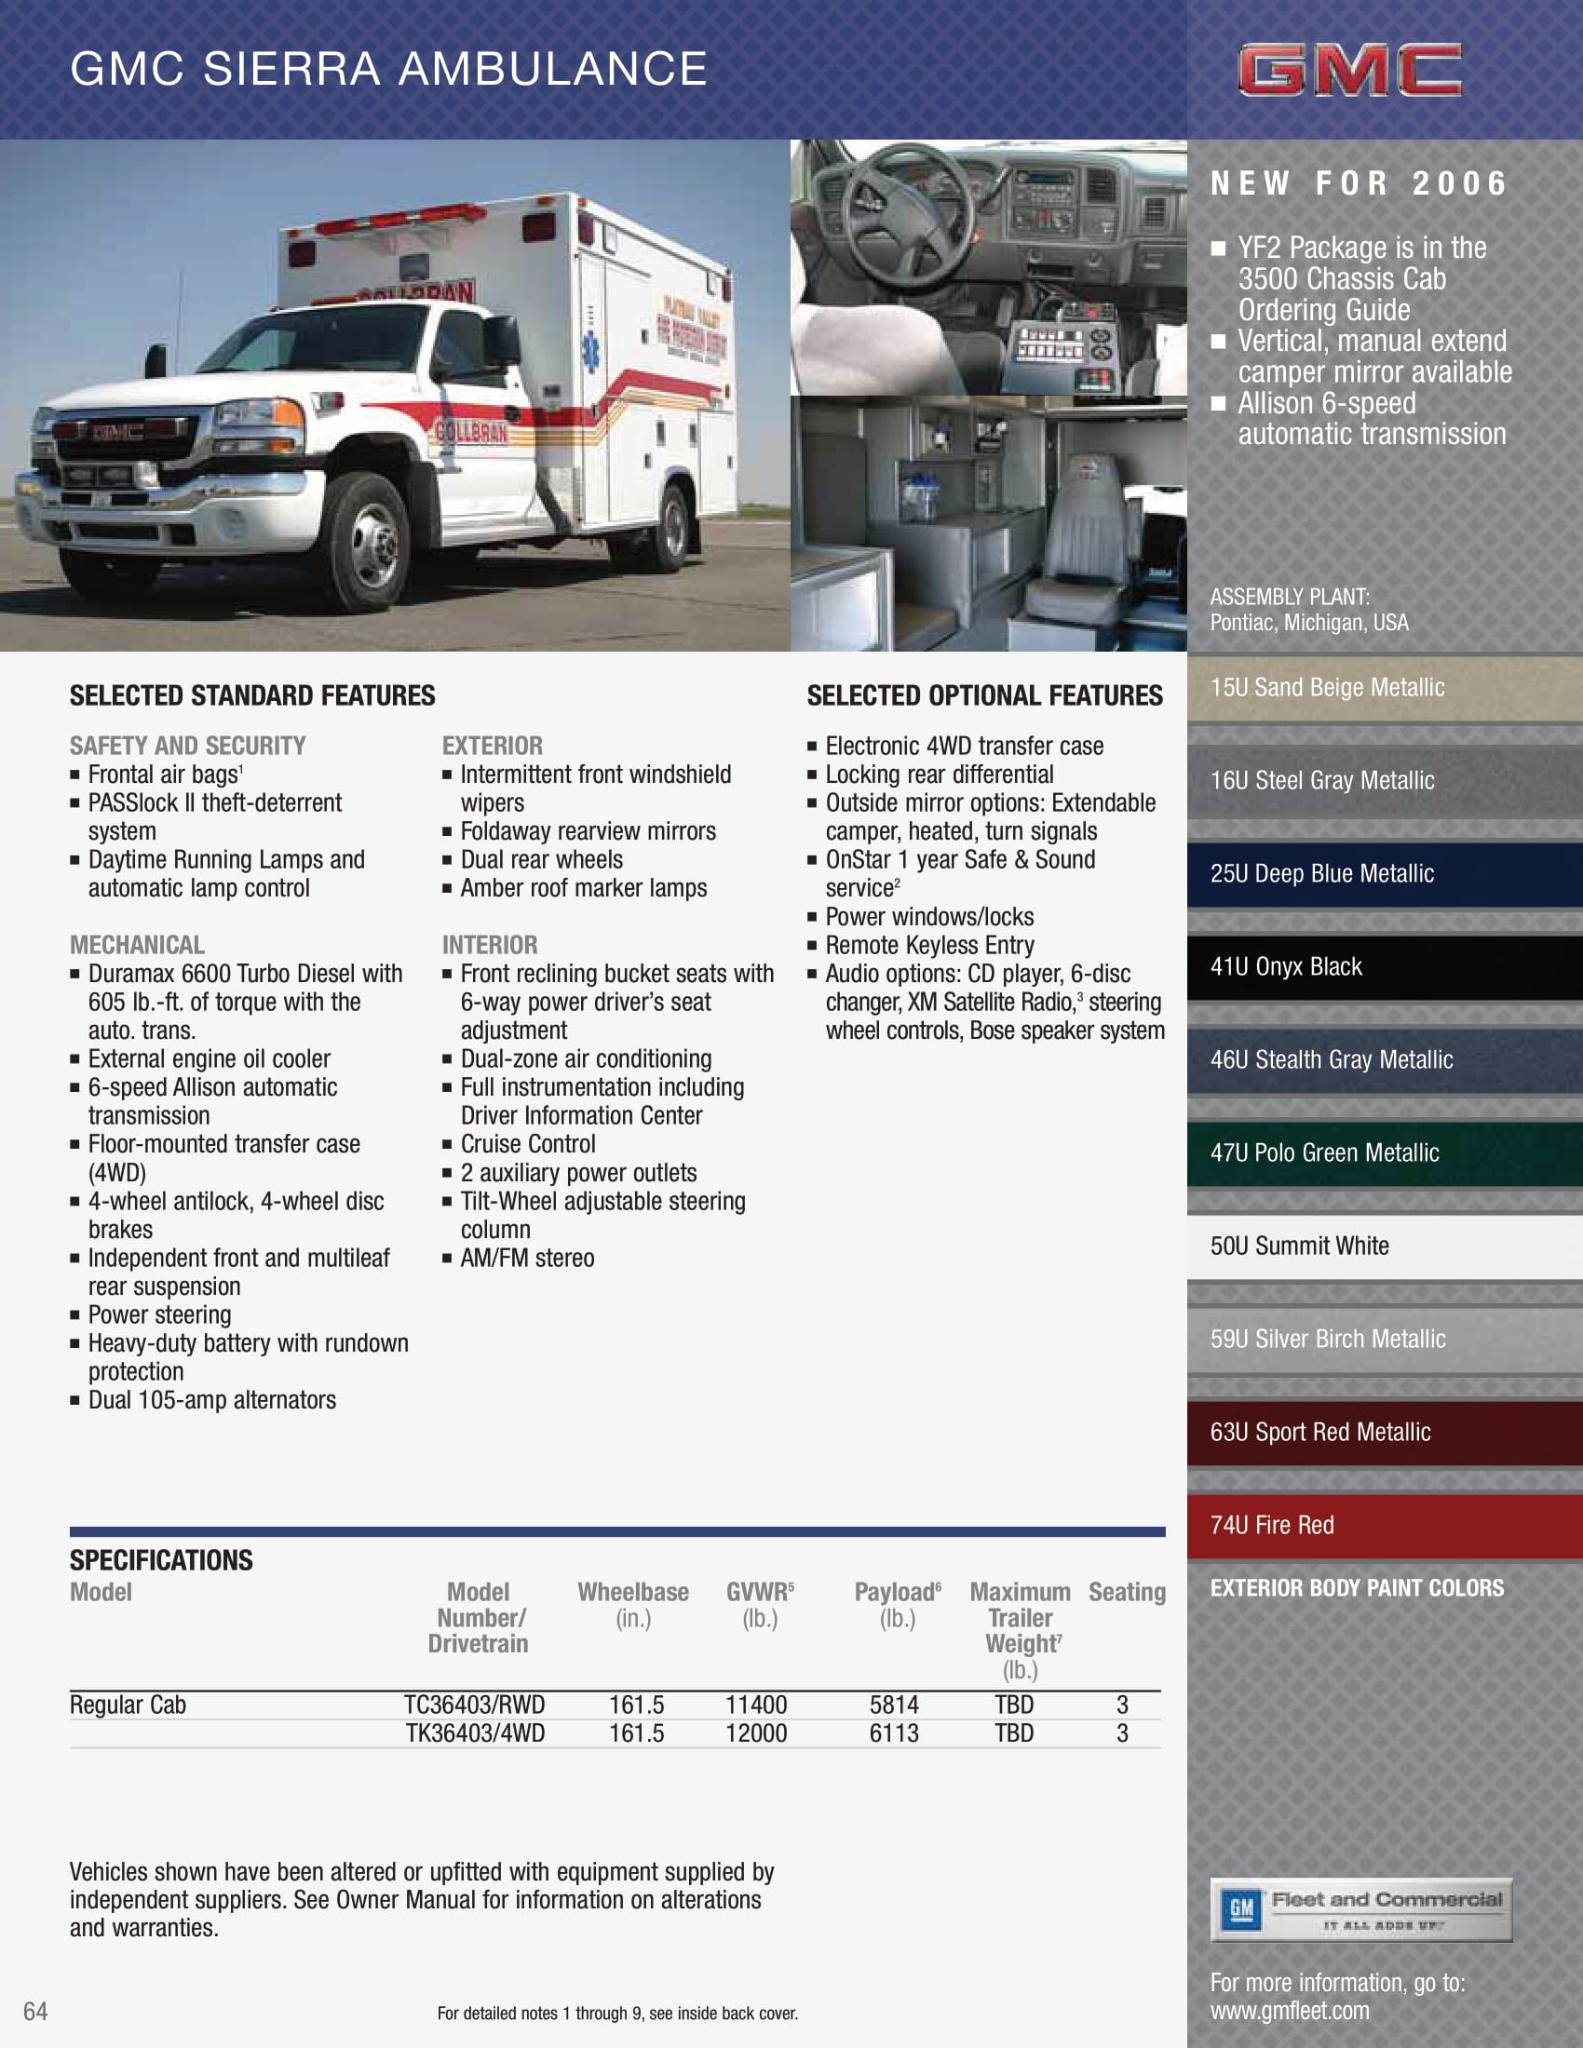 2006 GMC Paint Codes and Color Chart